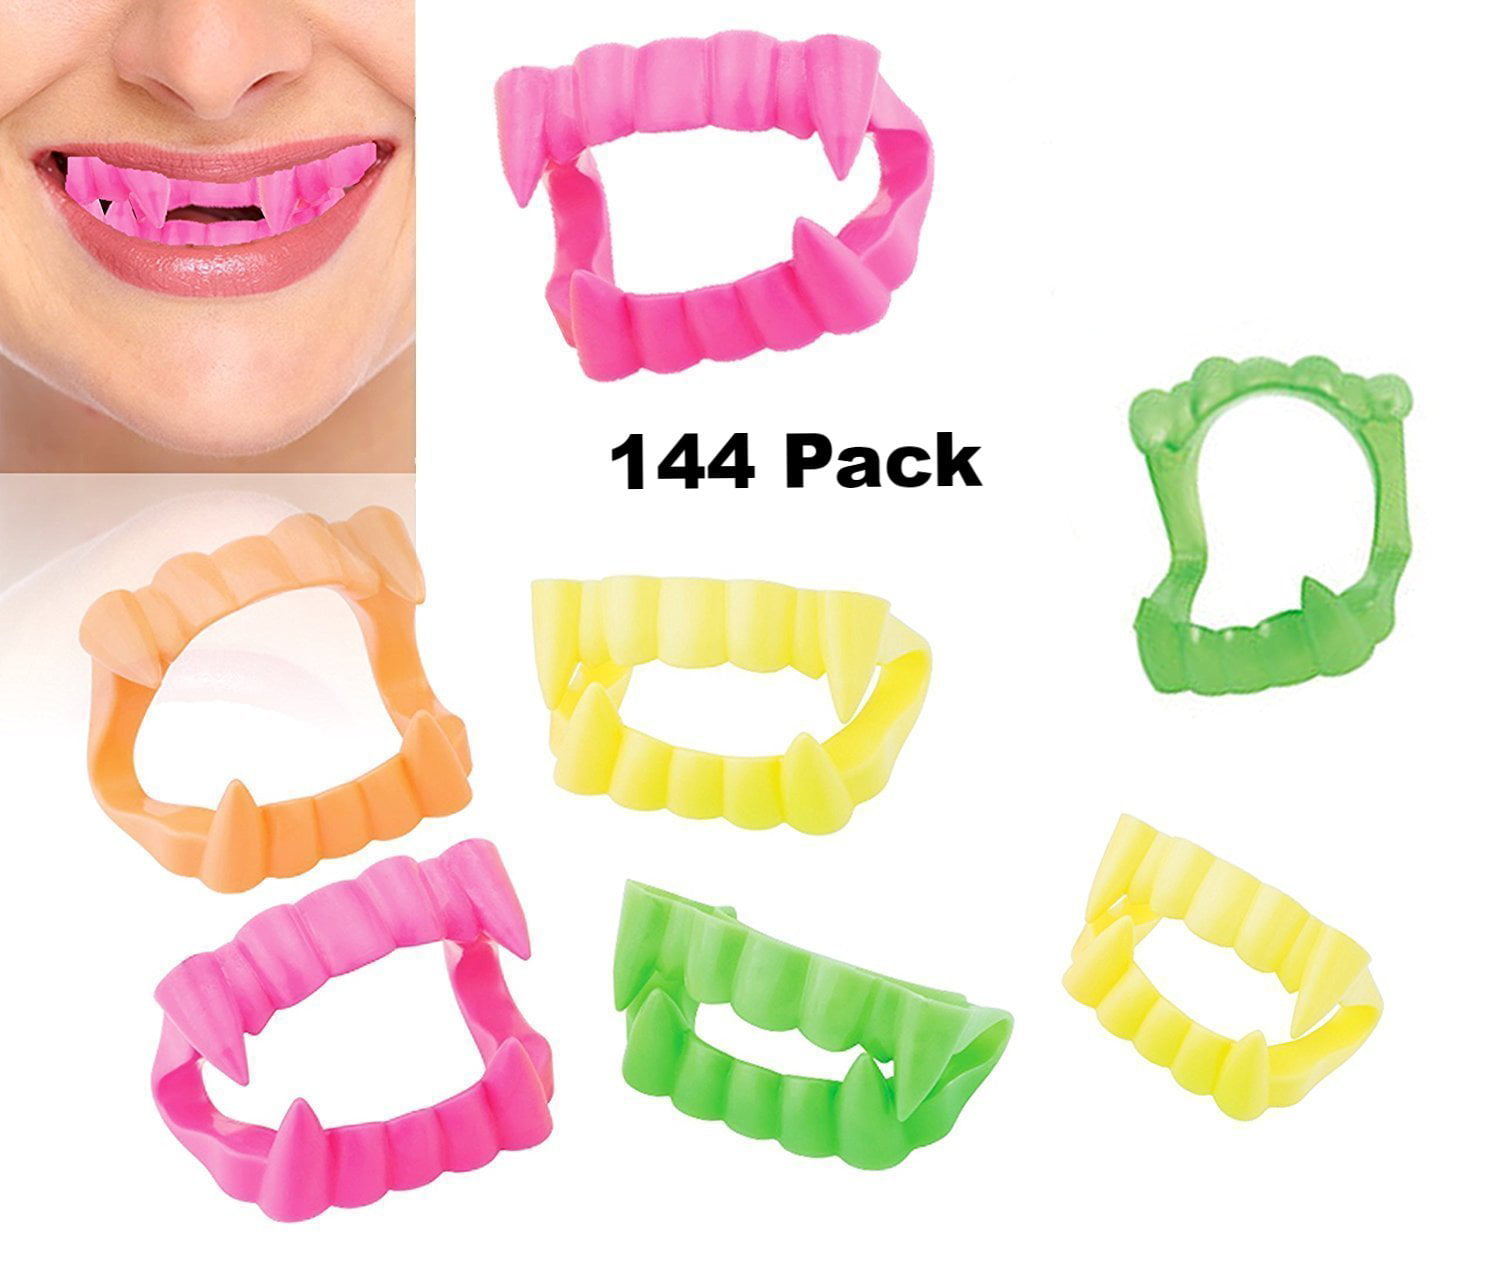 ArtCreativity Neon Vampire Fangs for Kids and Adults, Bulk Pack of 144, Vampirina Party Supplies, Dracula Costume Accessories, Best for Halloween